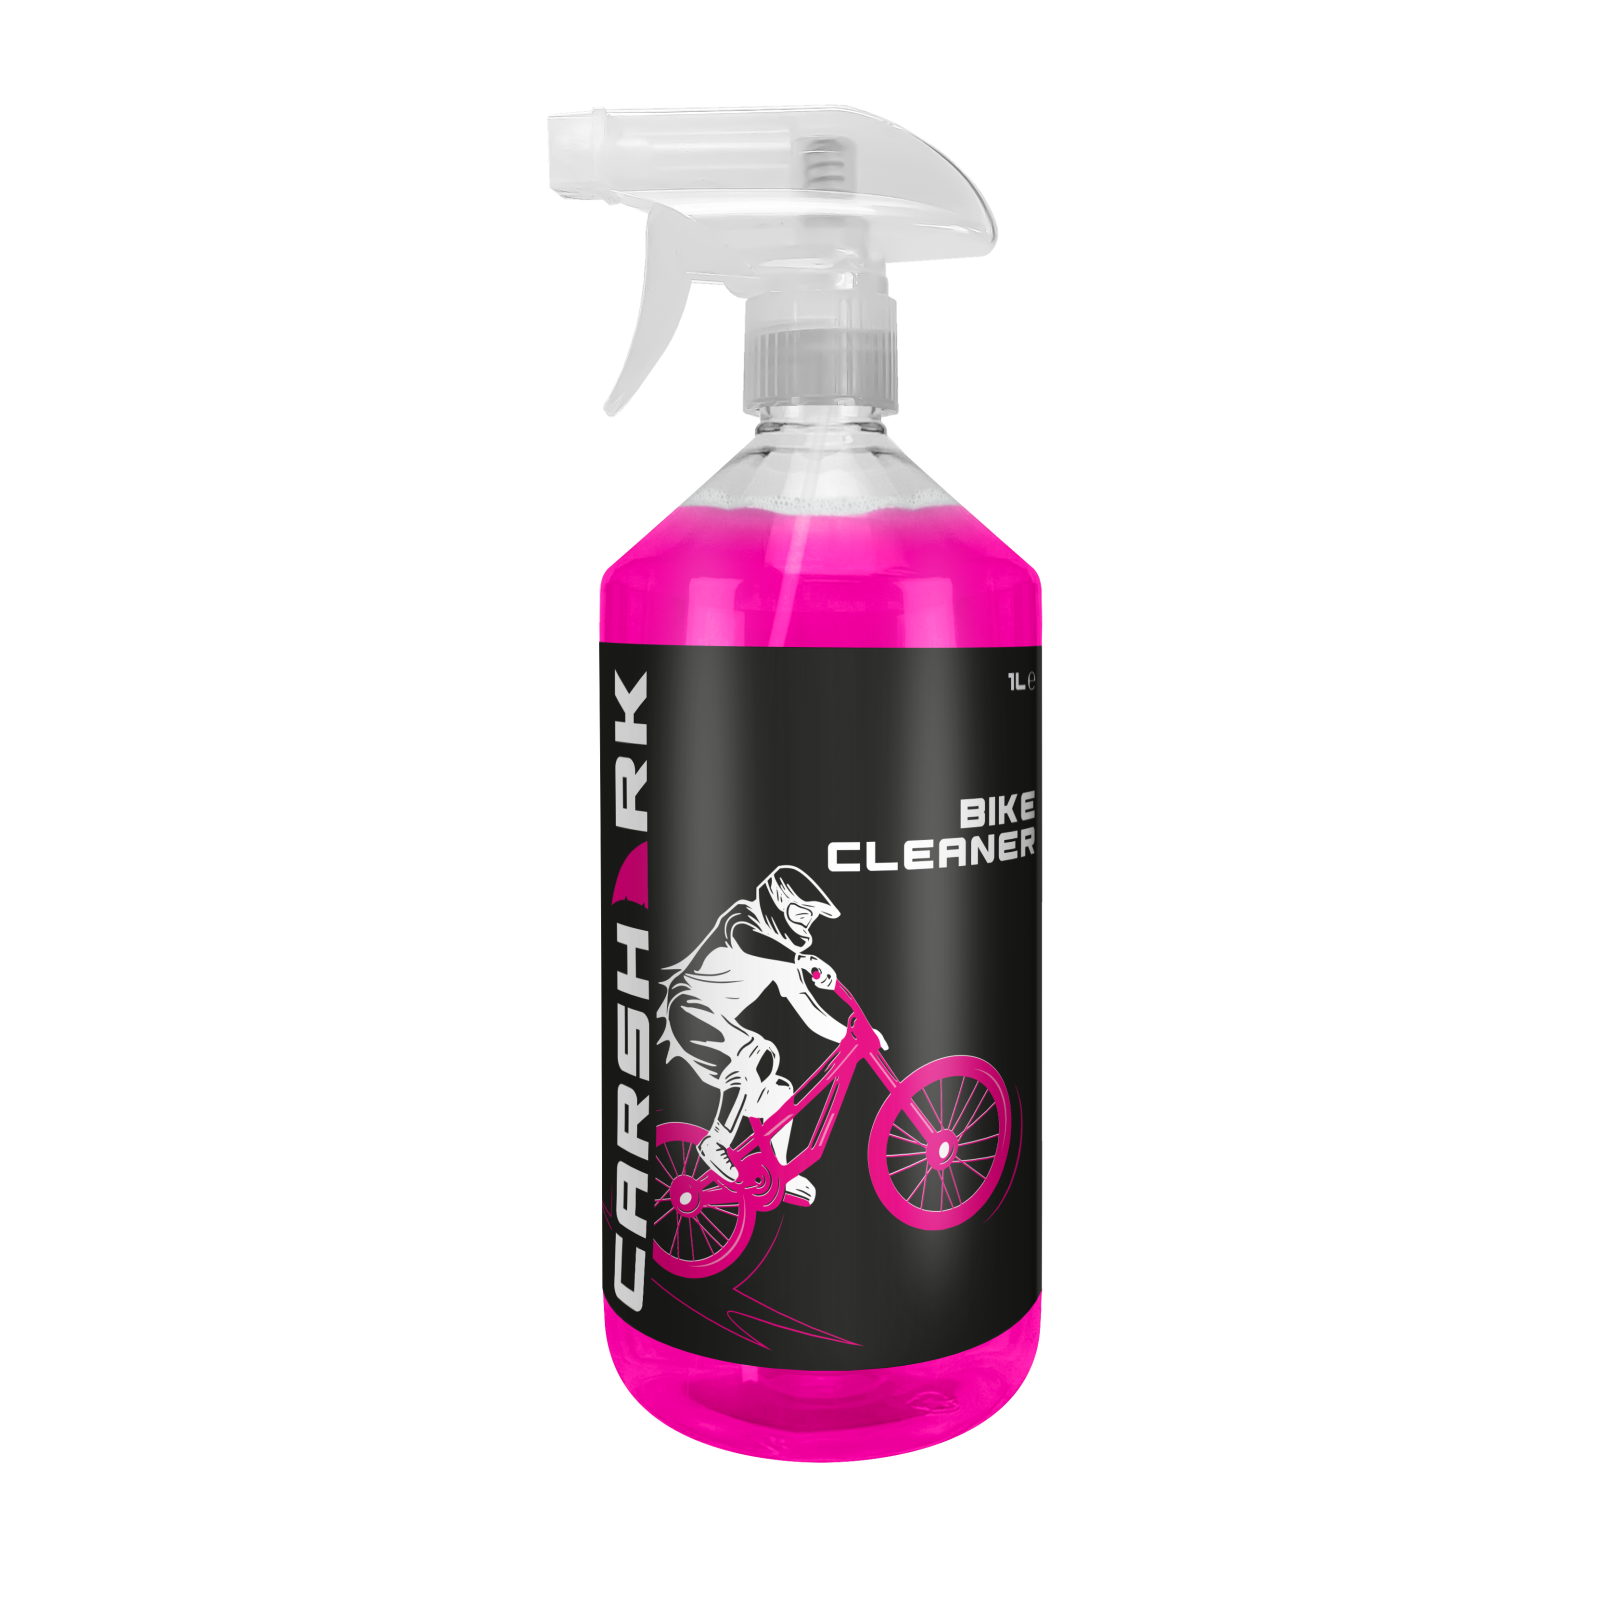 CARSHARK Bike Cleaner - 1L with 5L Refill - Suitable for All Types of Bikes